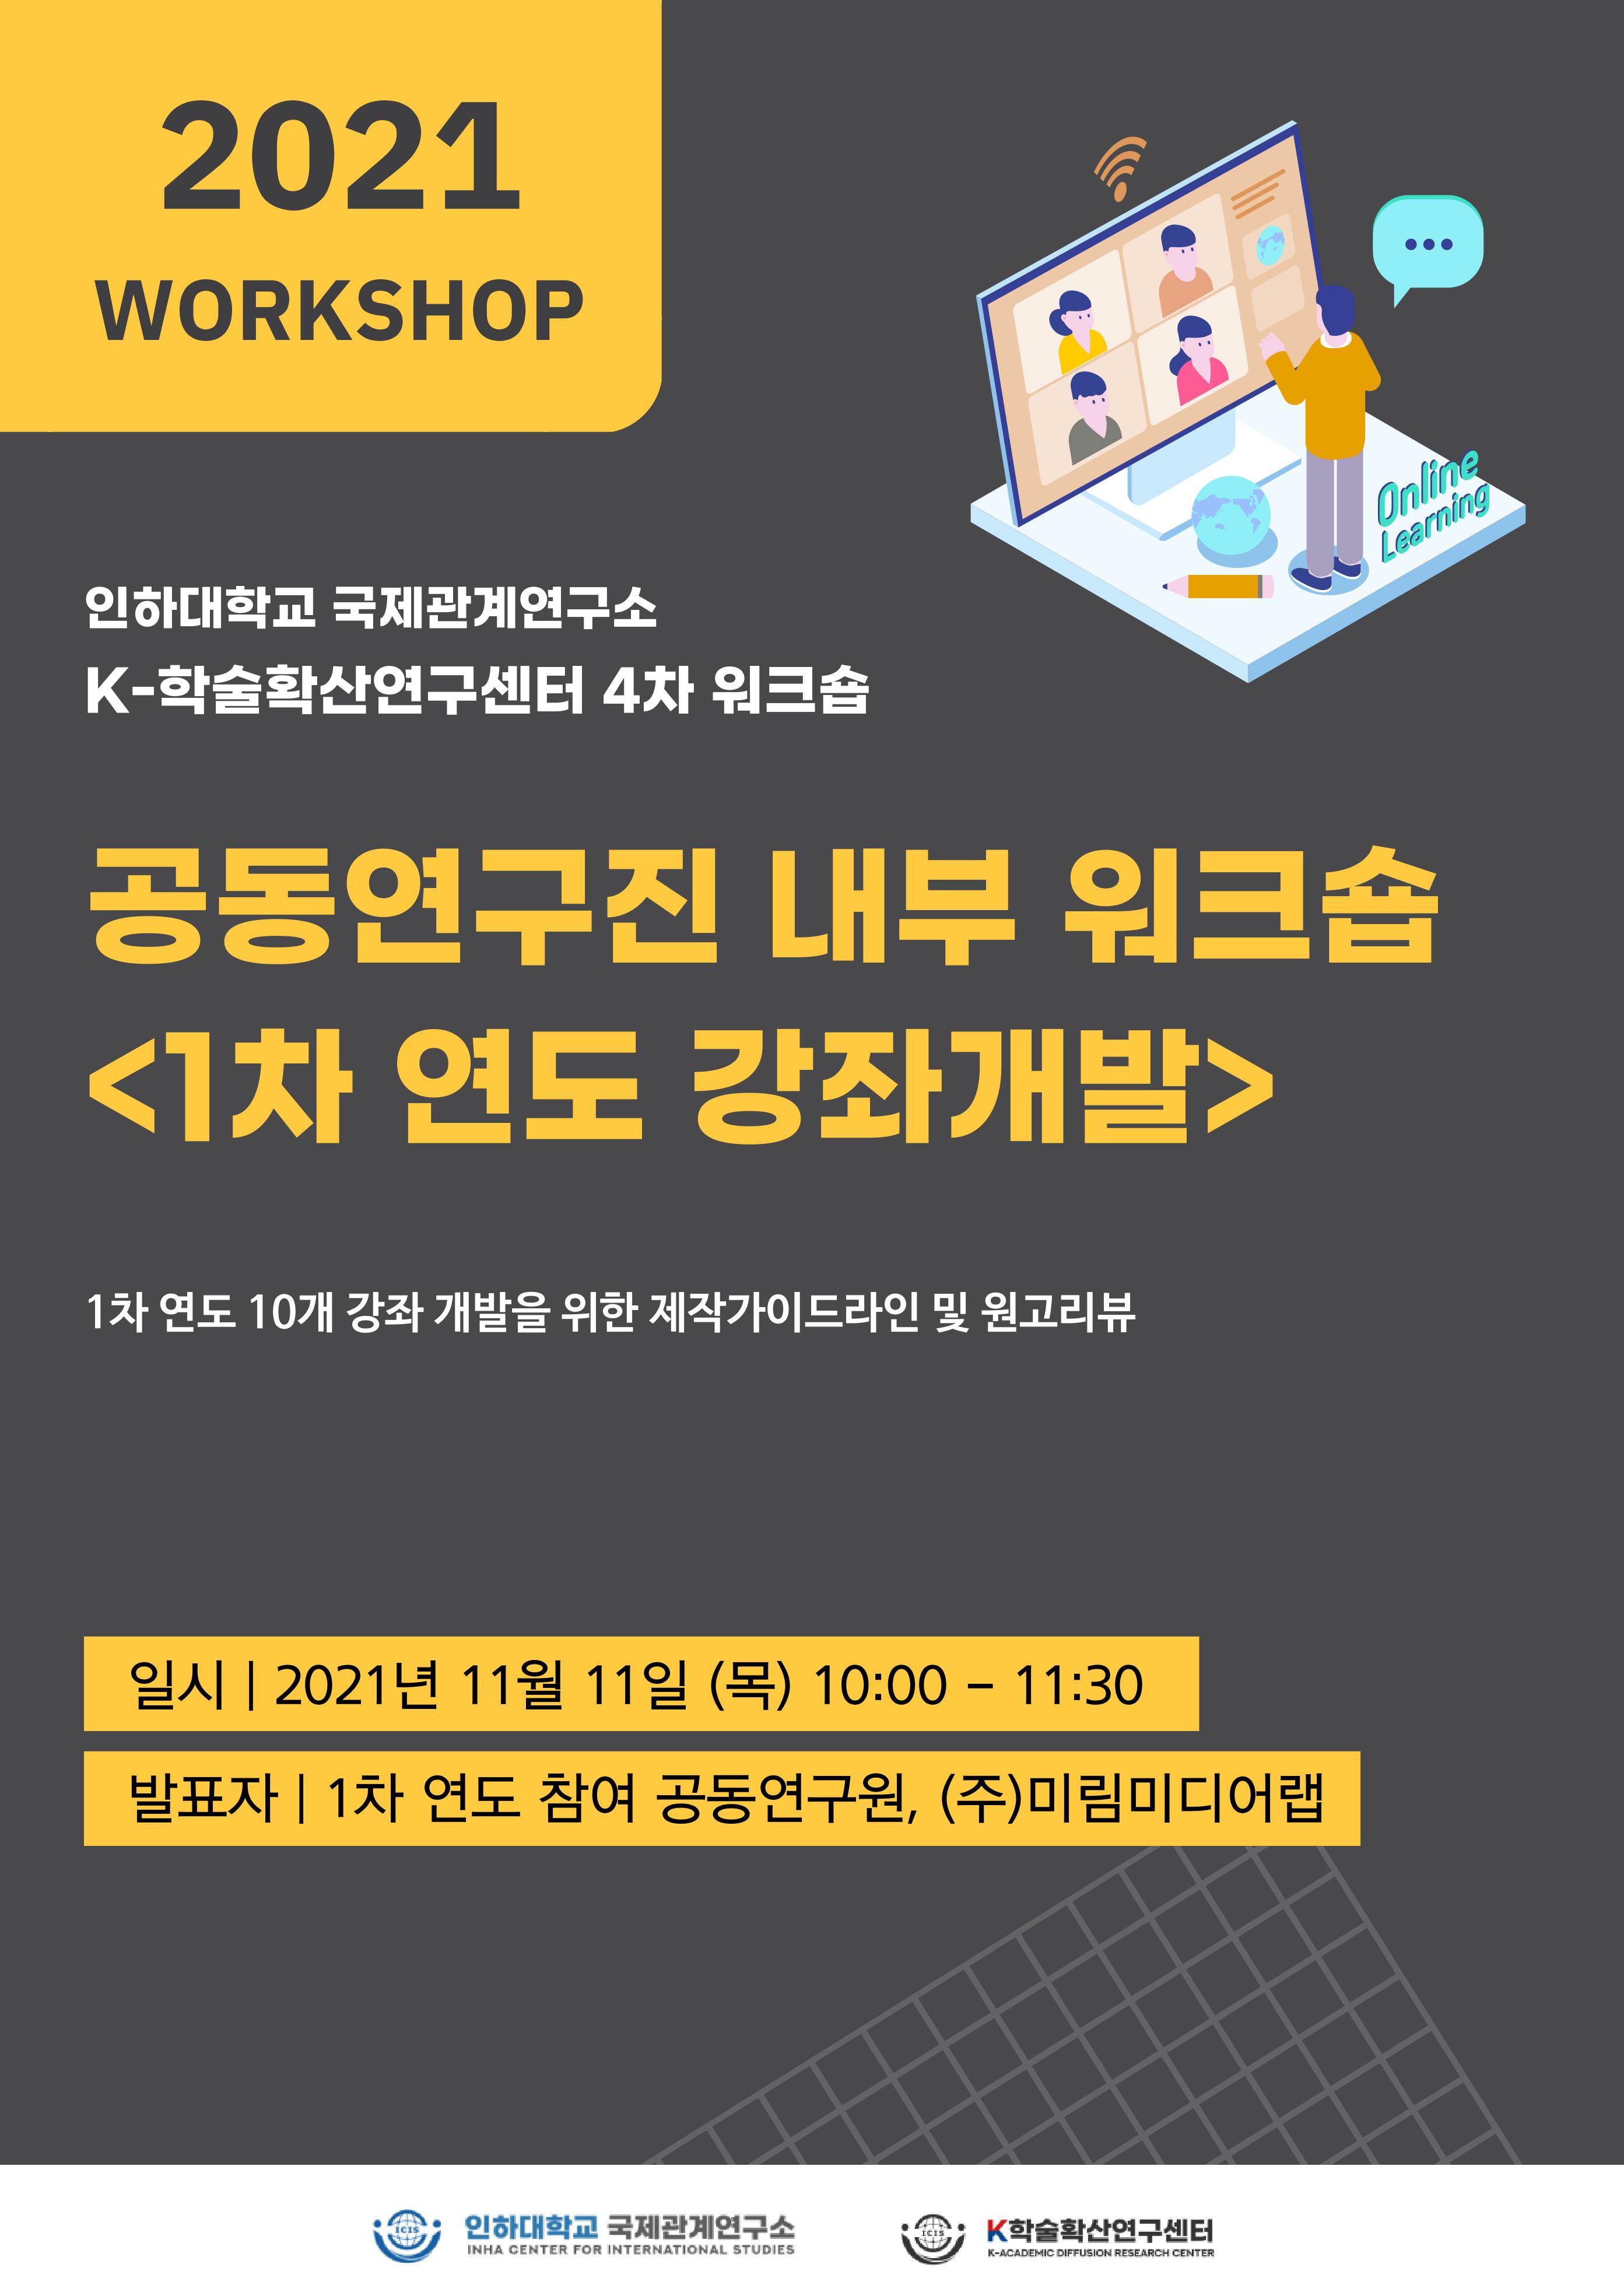 The First-year’s Online Course Development                                 썸네일